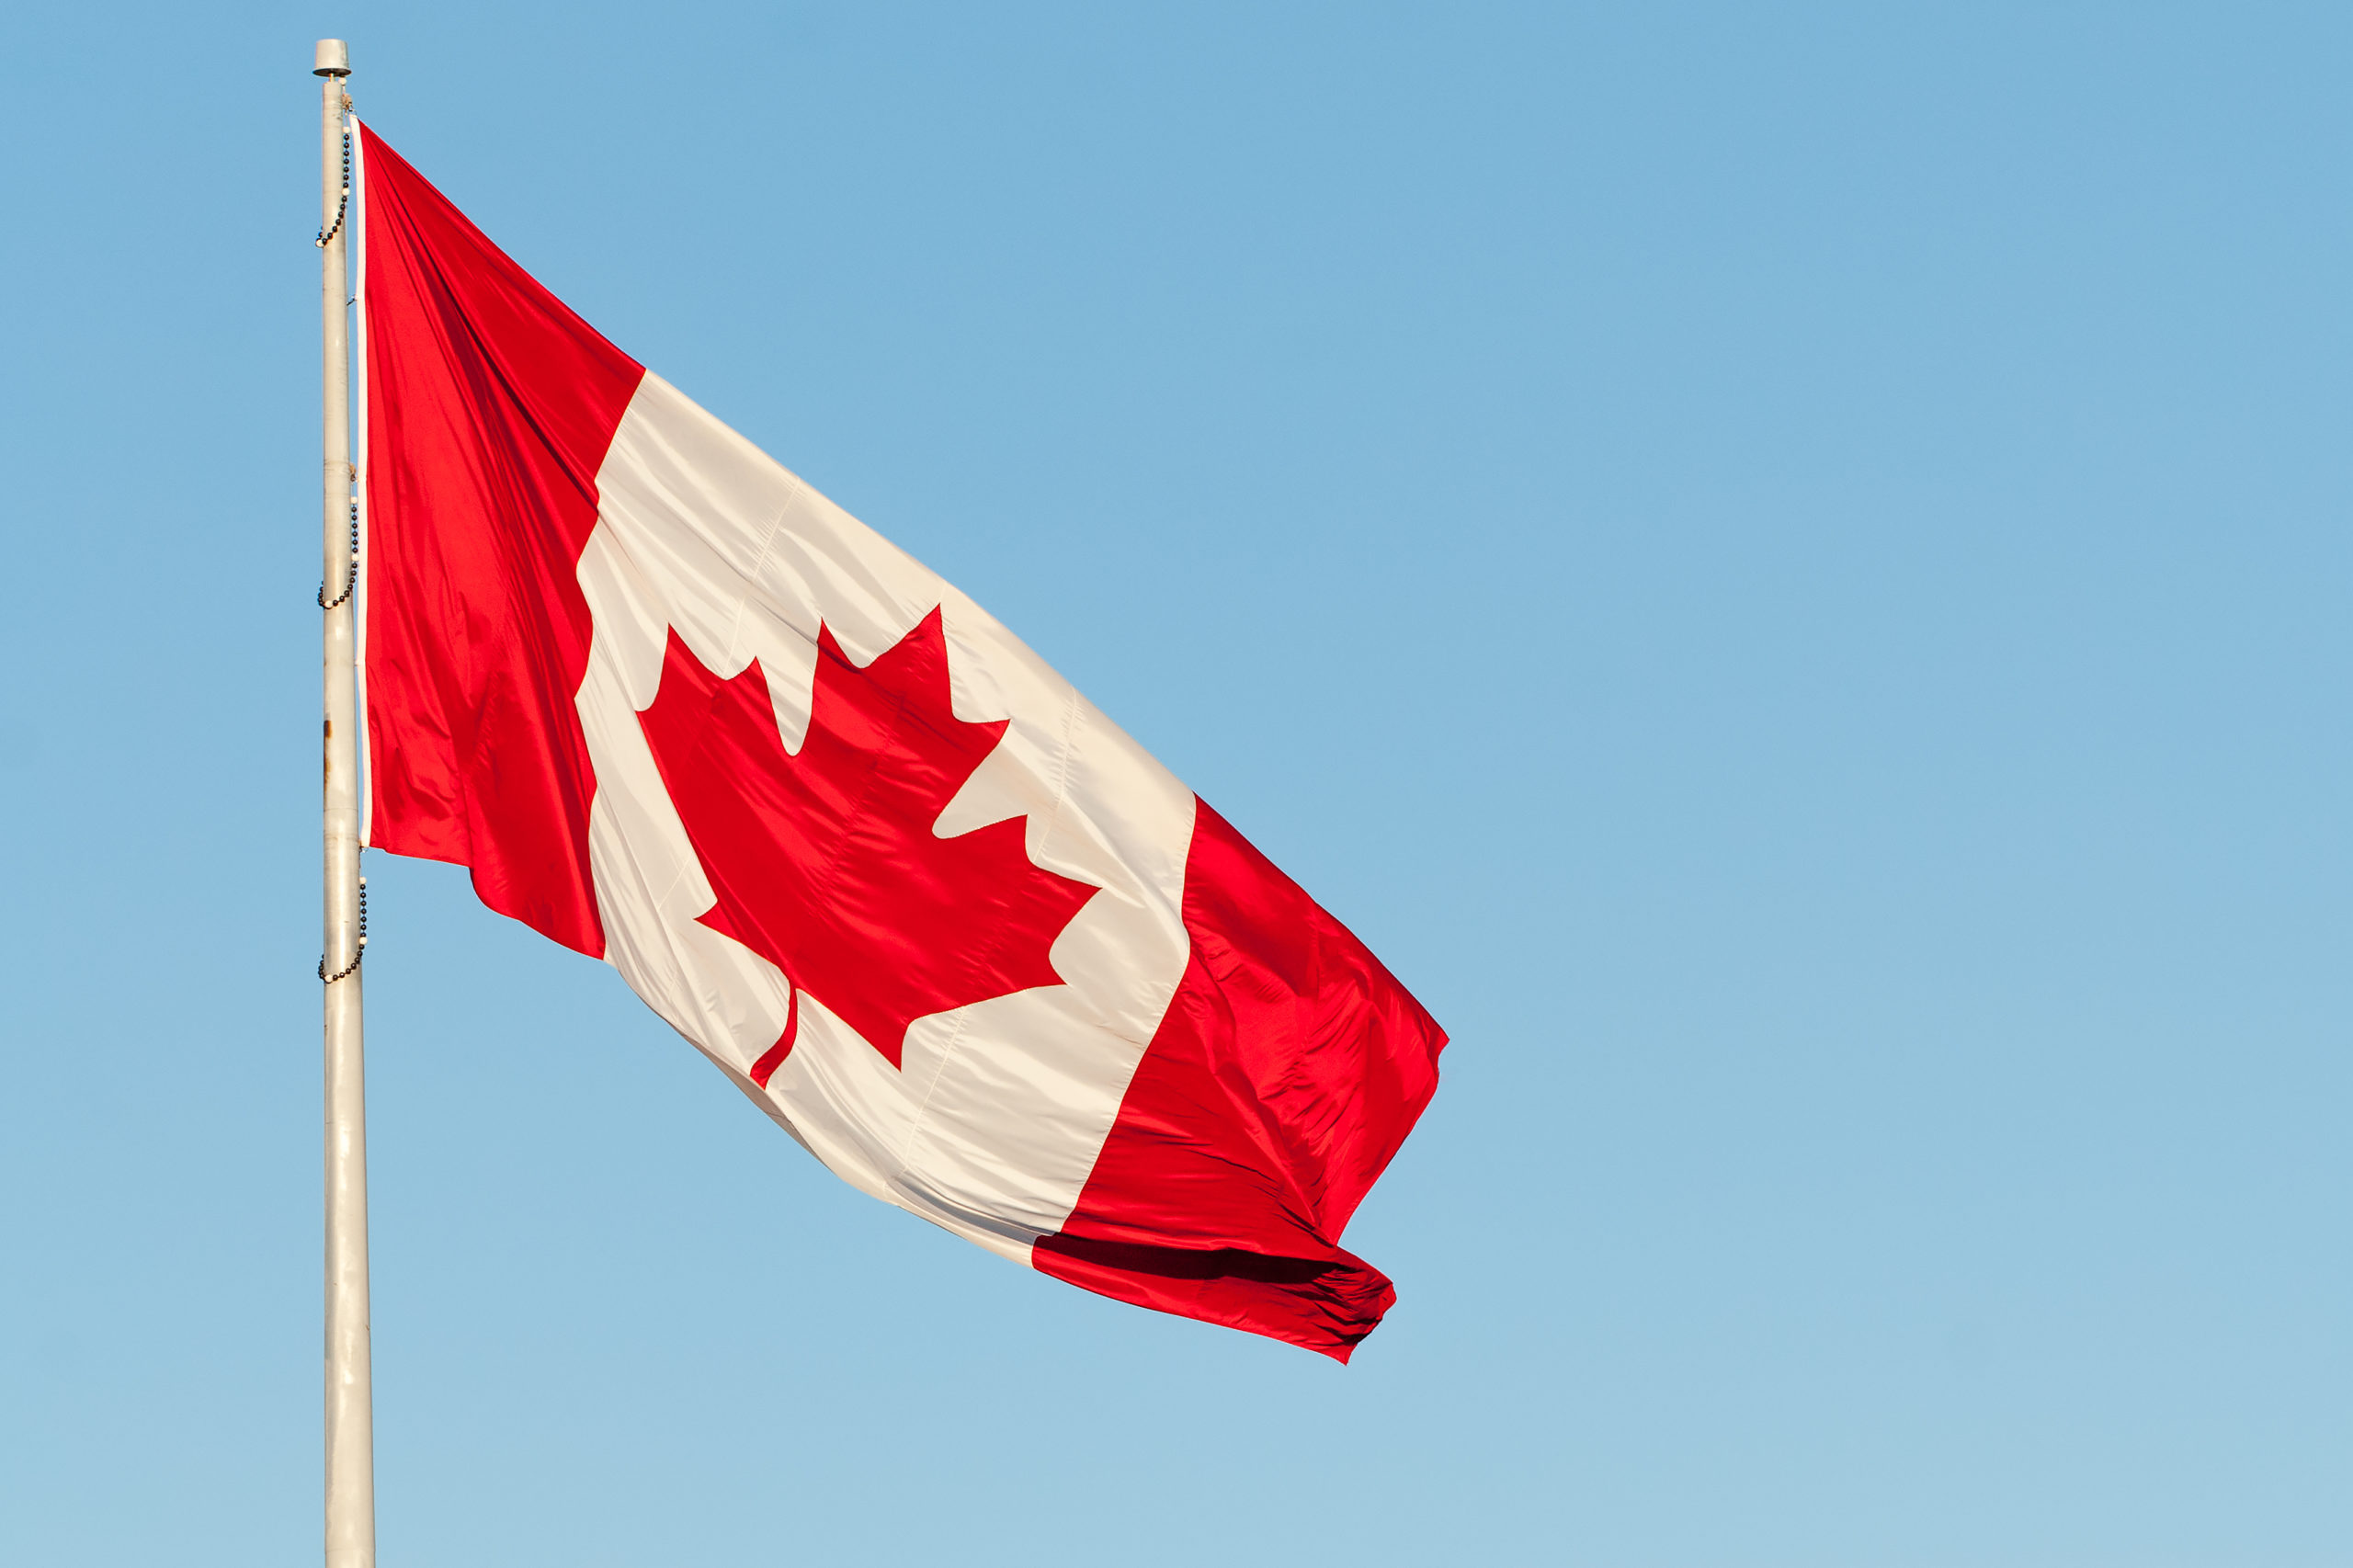 The Canadian flag waves in a breeze against a clear blue sky.